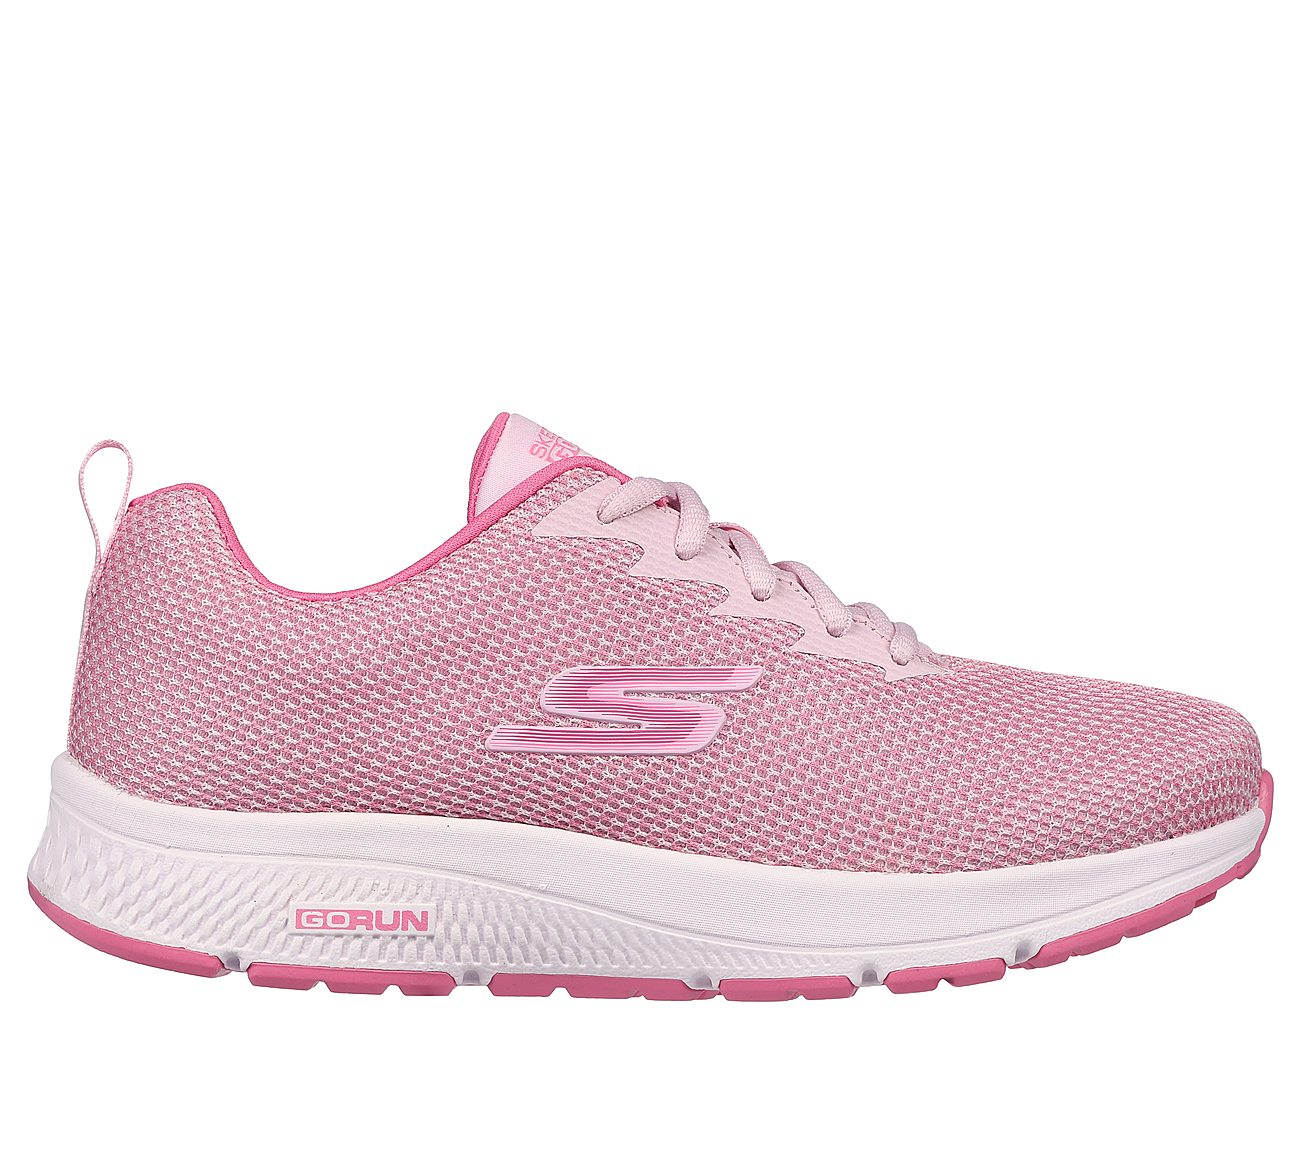 GO RUN CONSISTENT, PPINK Footwear Lateral View